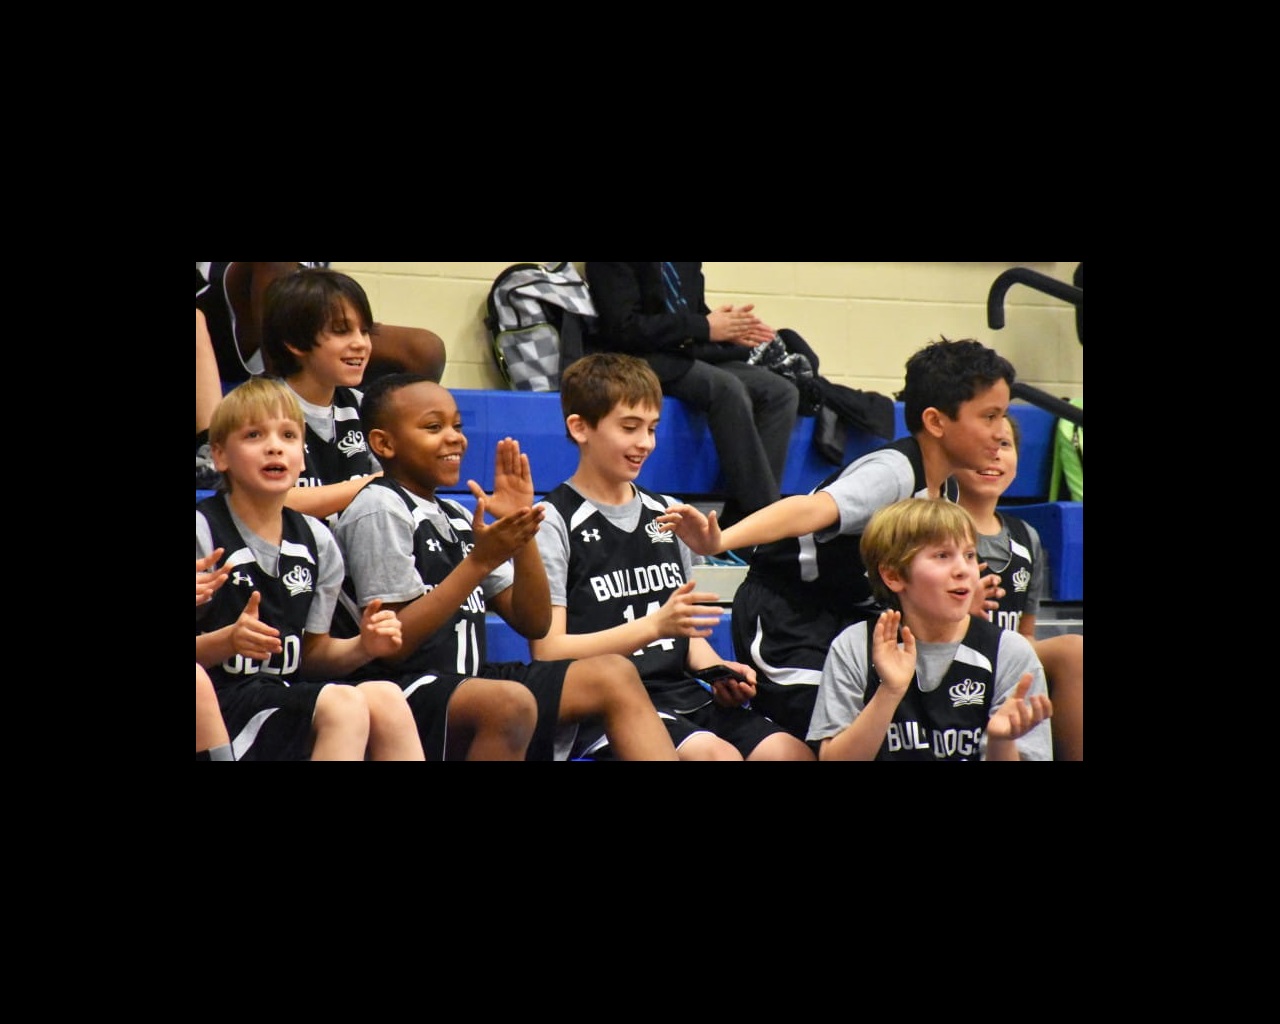 Primary Basketball Teams Race to Three Wins-primary-basketball-teams-race-to-three-wins-DSC_0383